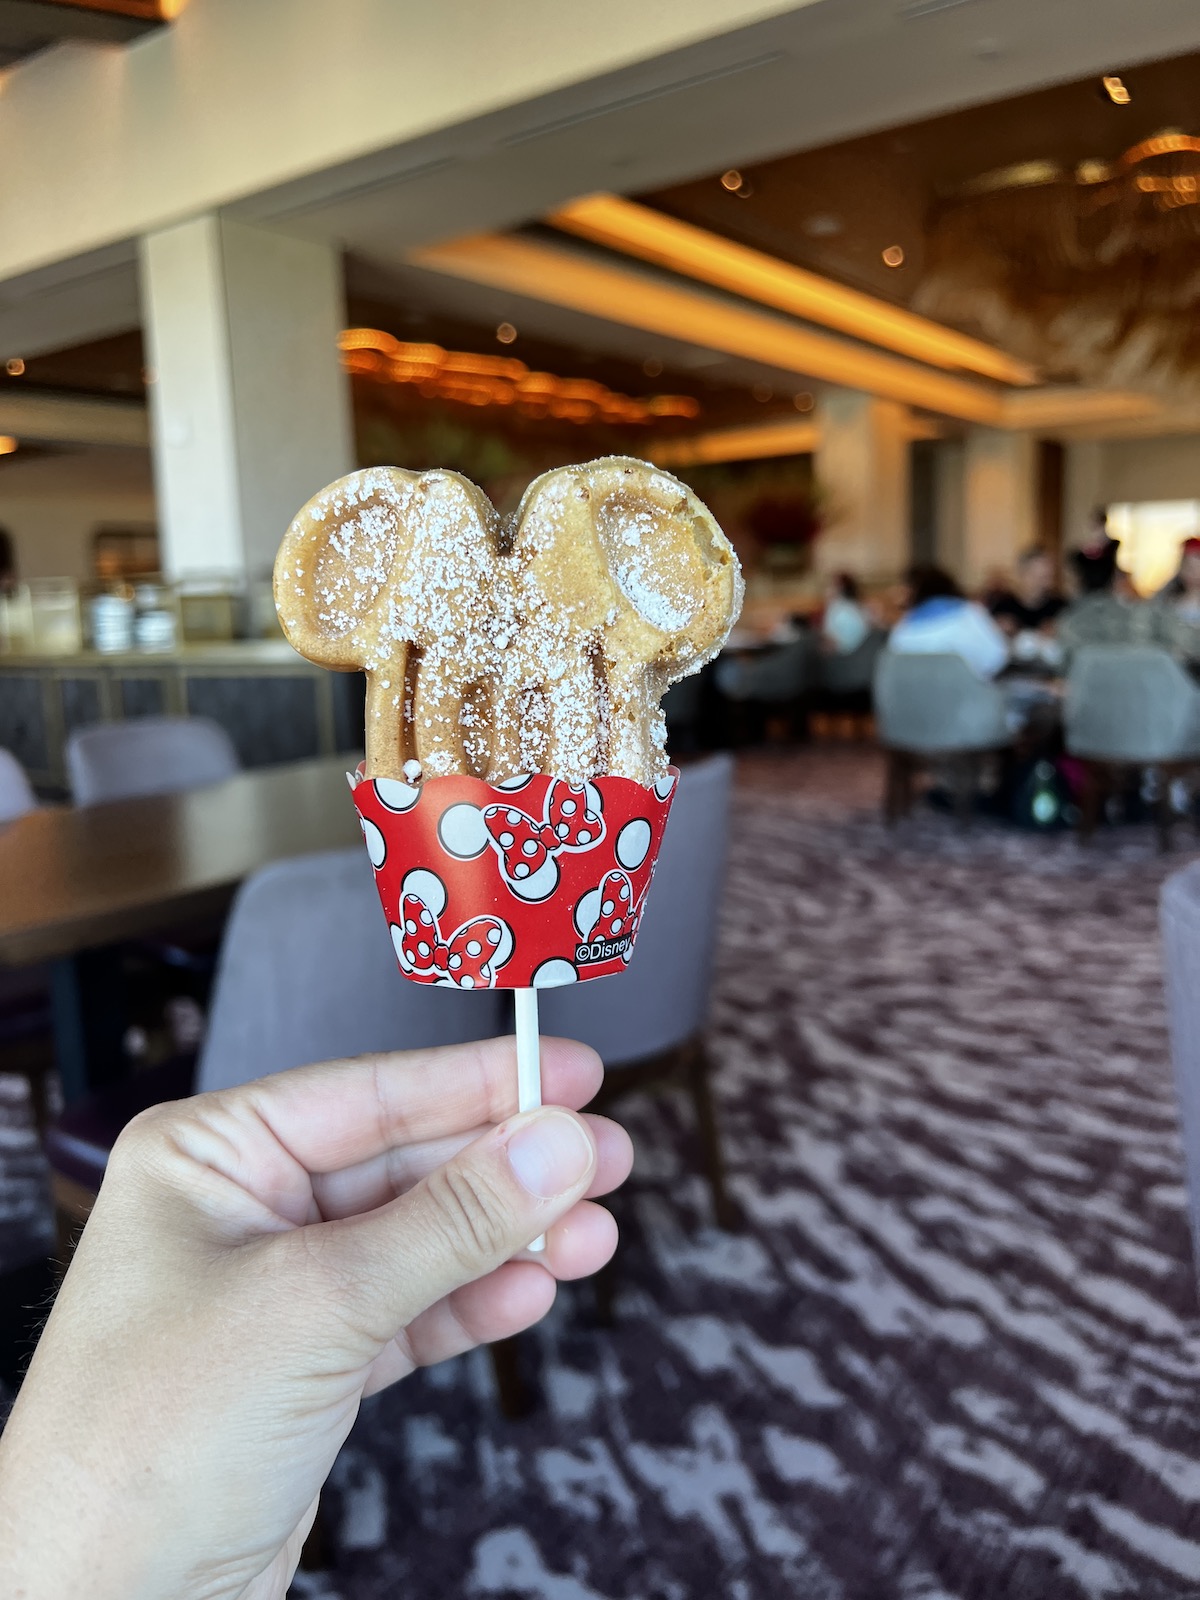 Food Review of Topolino's terrace Character Breakfast